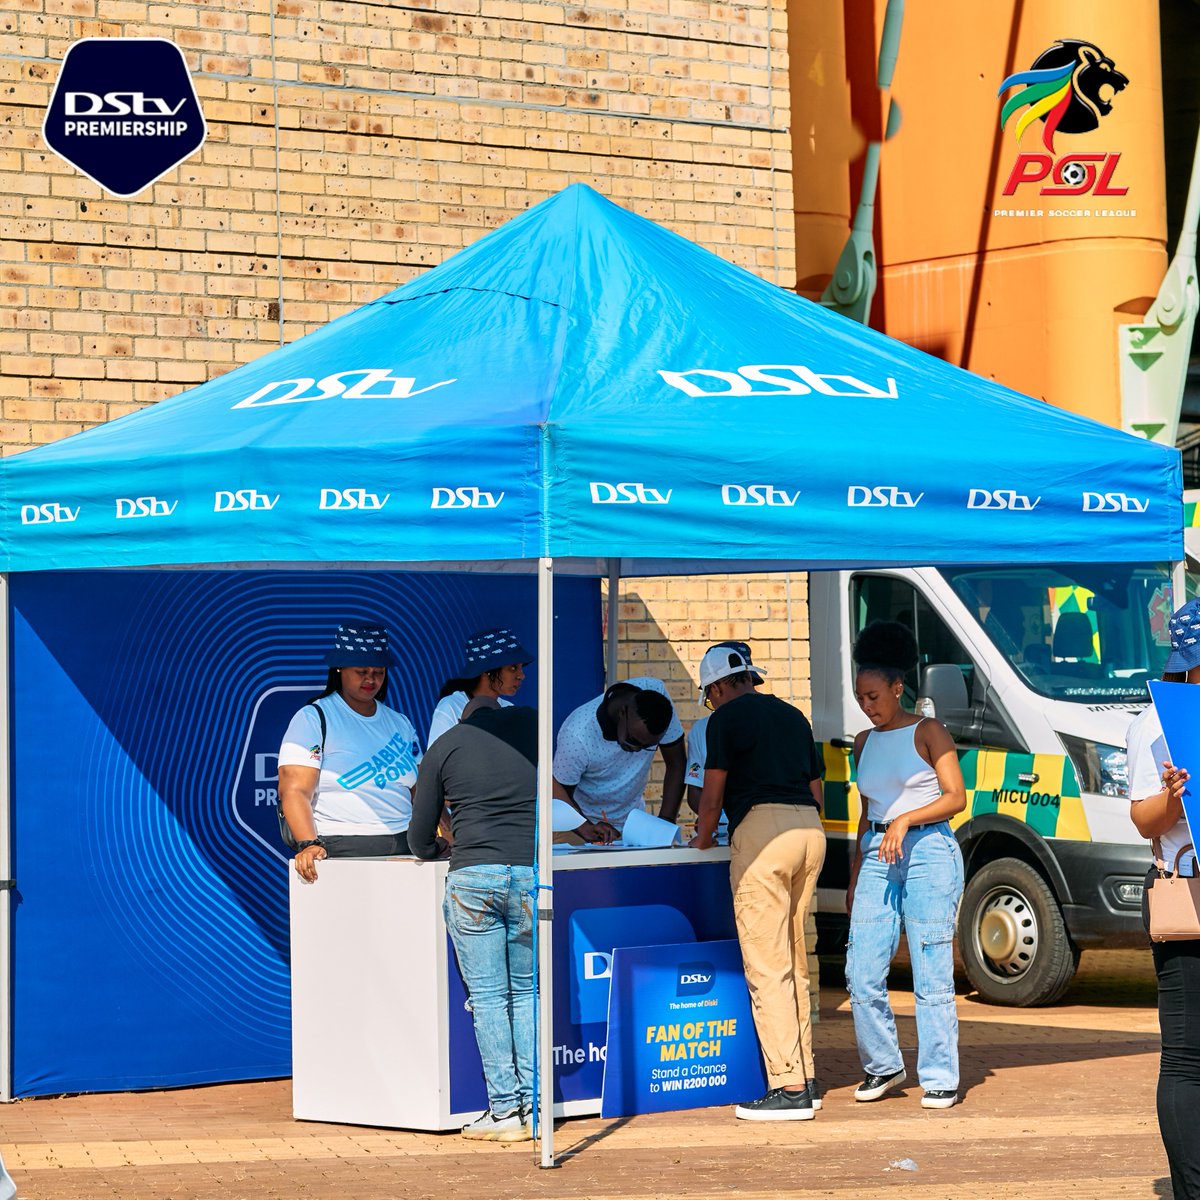 Sesiphakathi eMbombela Stadium where you could win R200 000 💰 Come over and sign up at our #AmaFanDayz activation zone ✍️